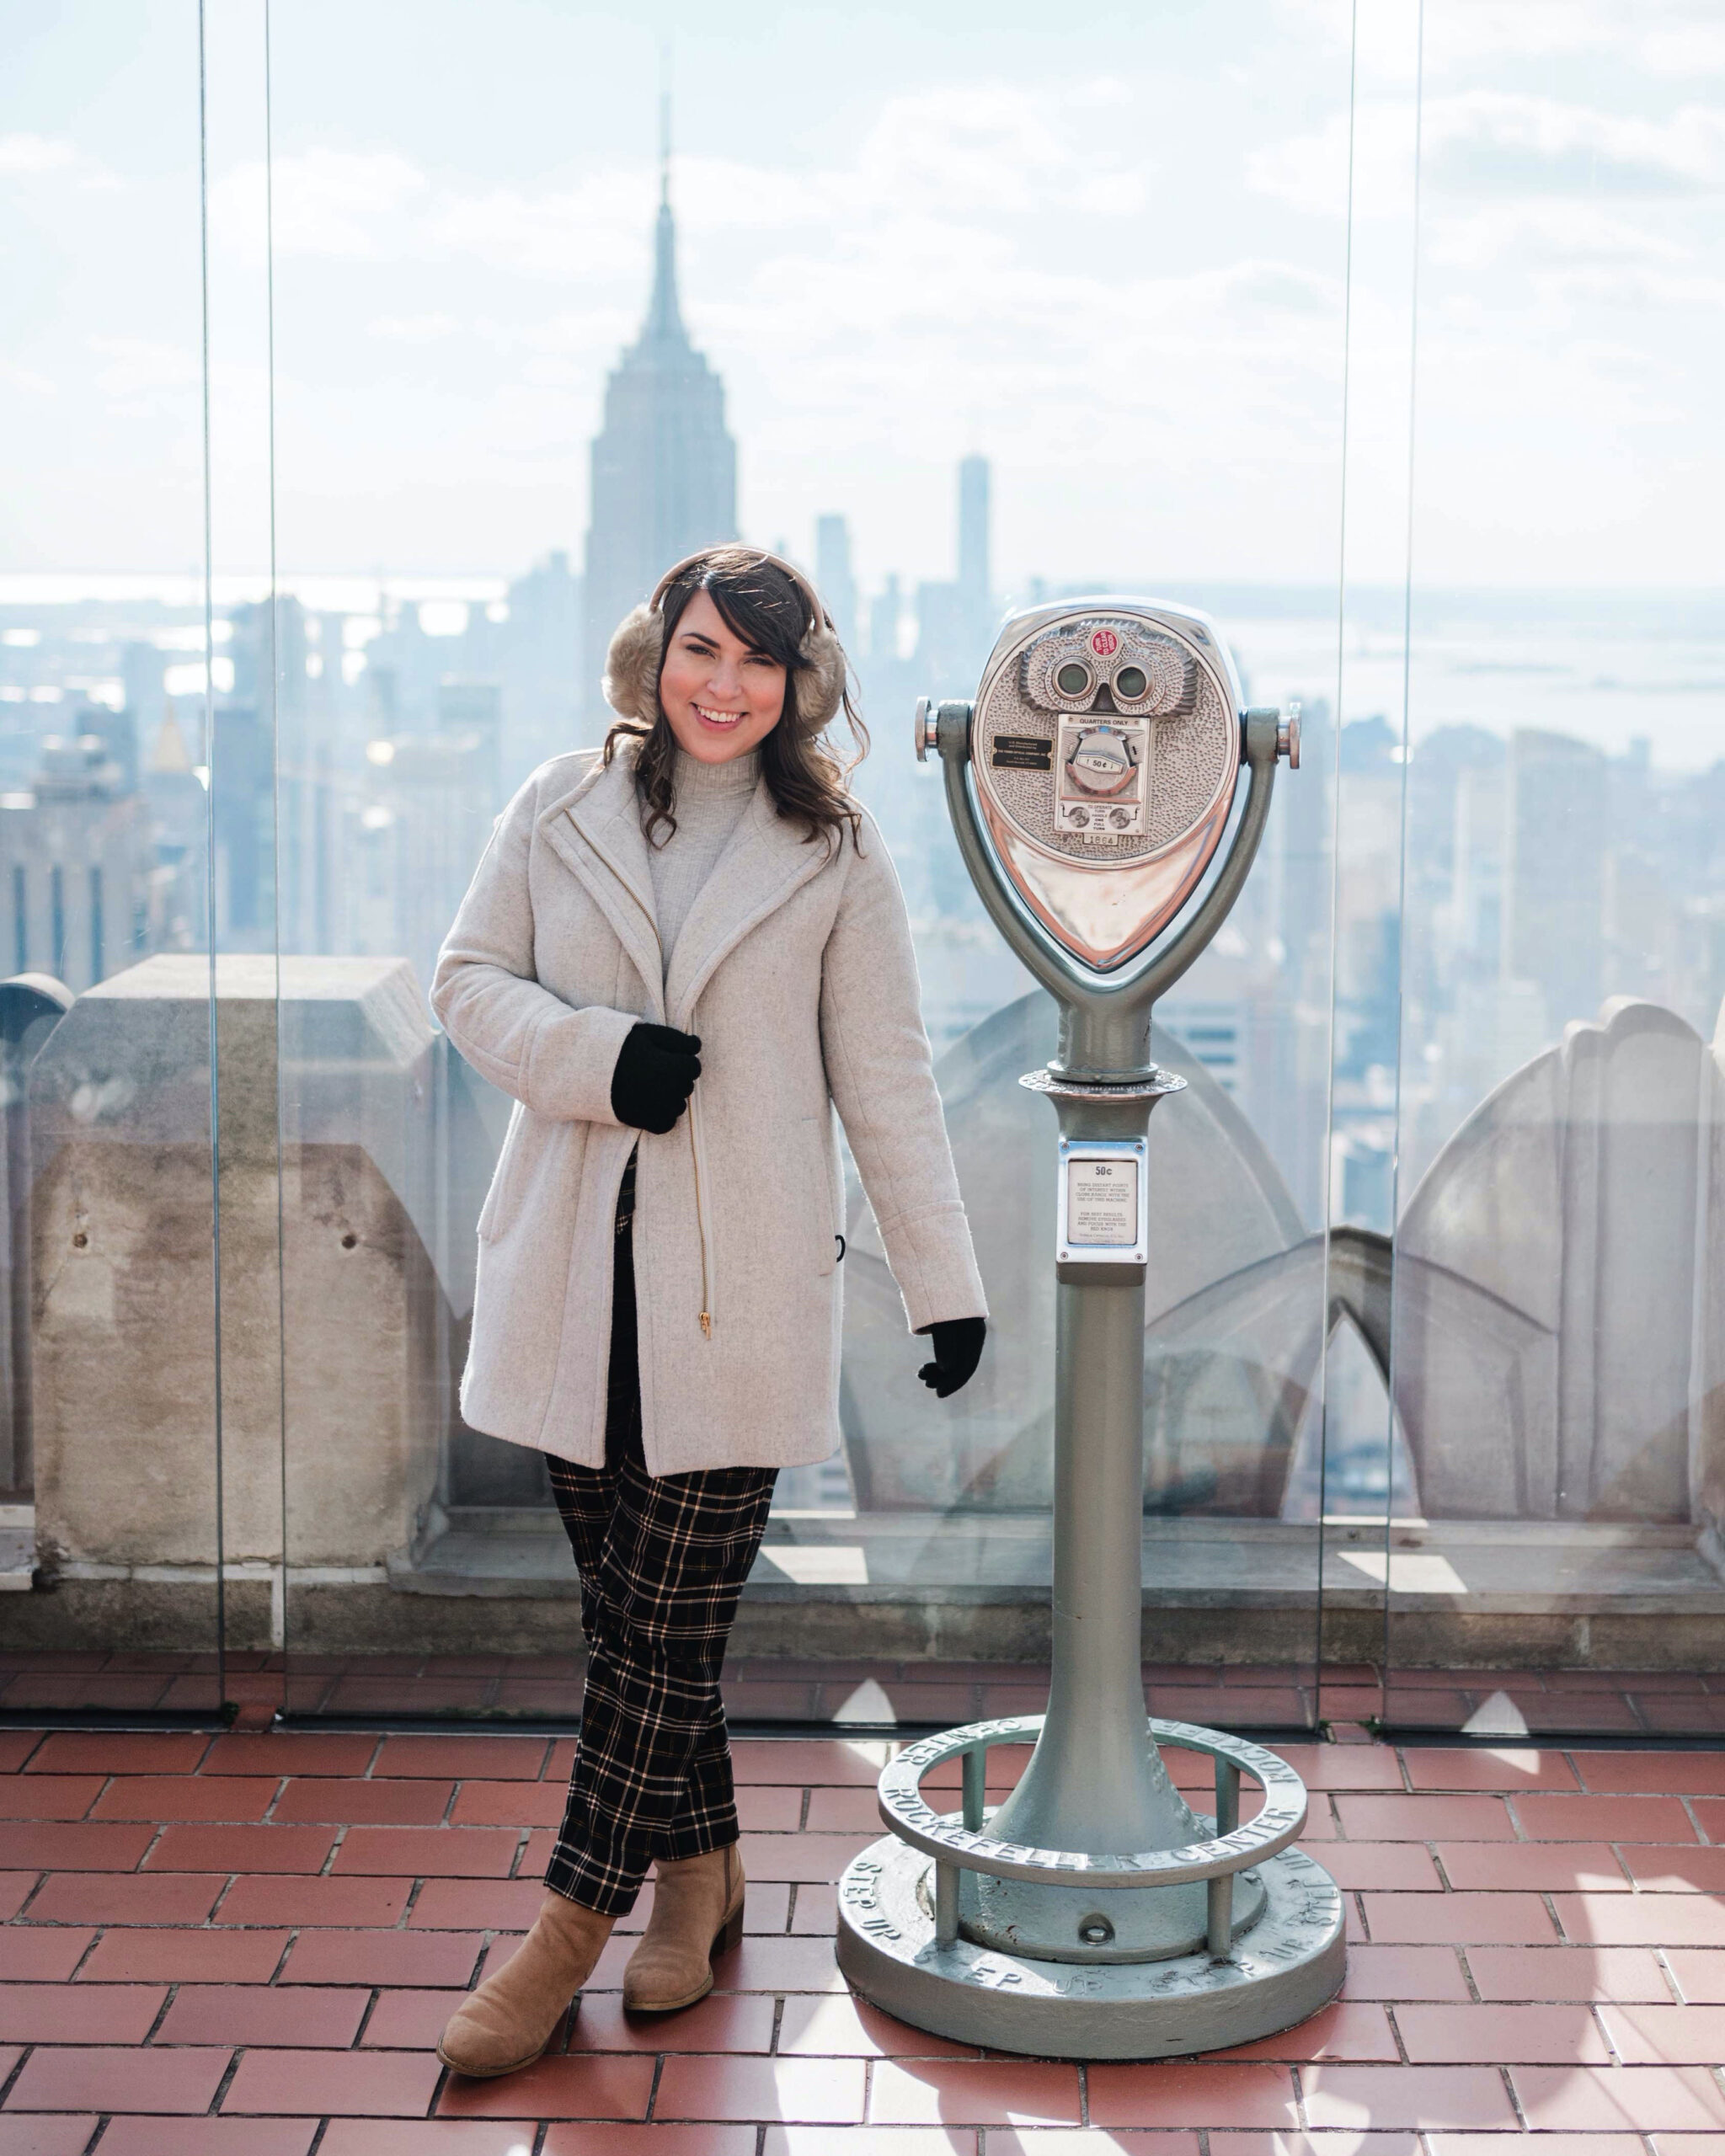 Brittney Naylor wearing black plaid pants, brown boots, grey petticoat, black gloves, and ear muffs on top of the rockefeller plaza with views of the empire state building and other sky scrapers in New York City. NYC Christmastime Bucket List Things to do, 2 days in NYC as first-timers